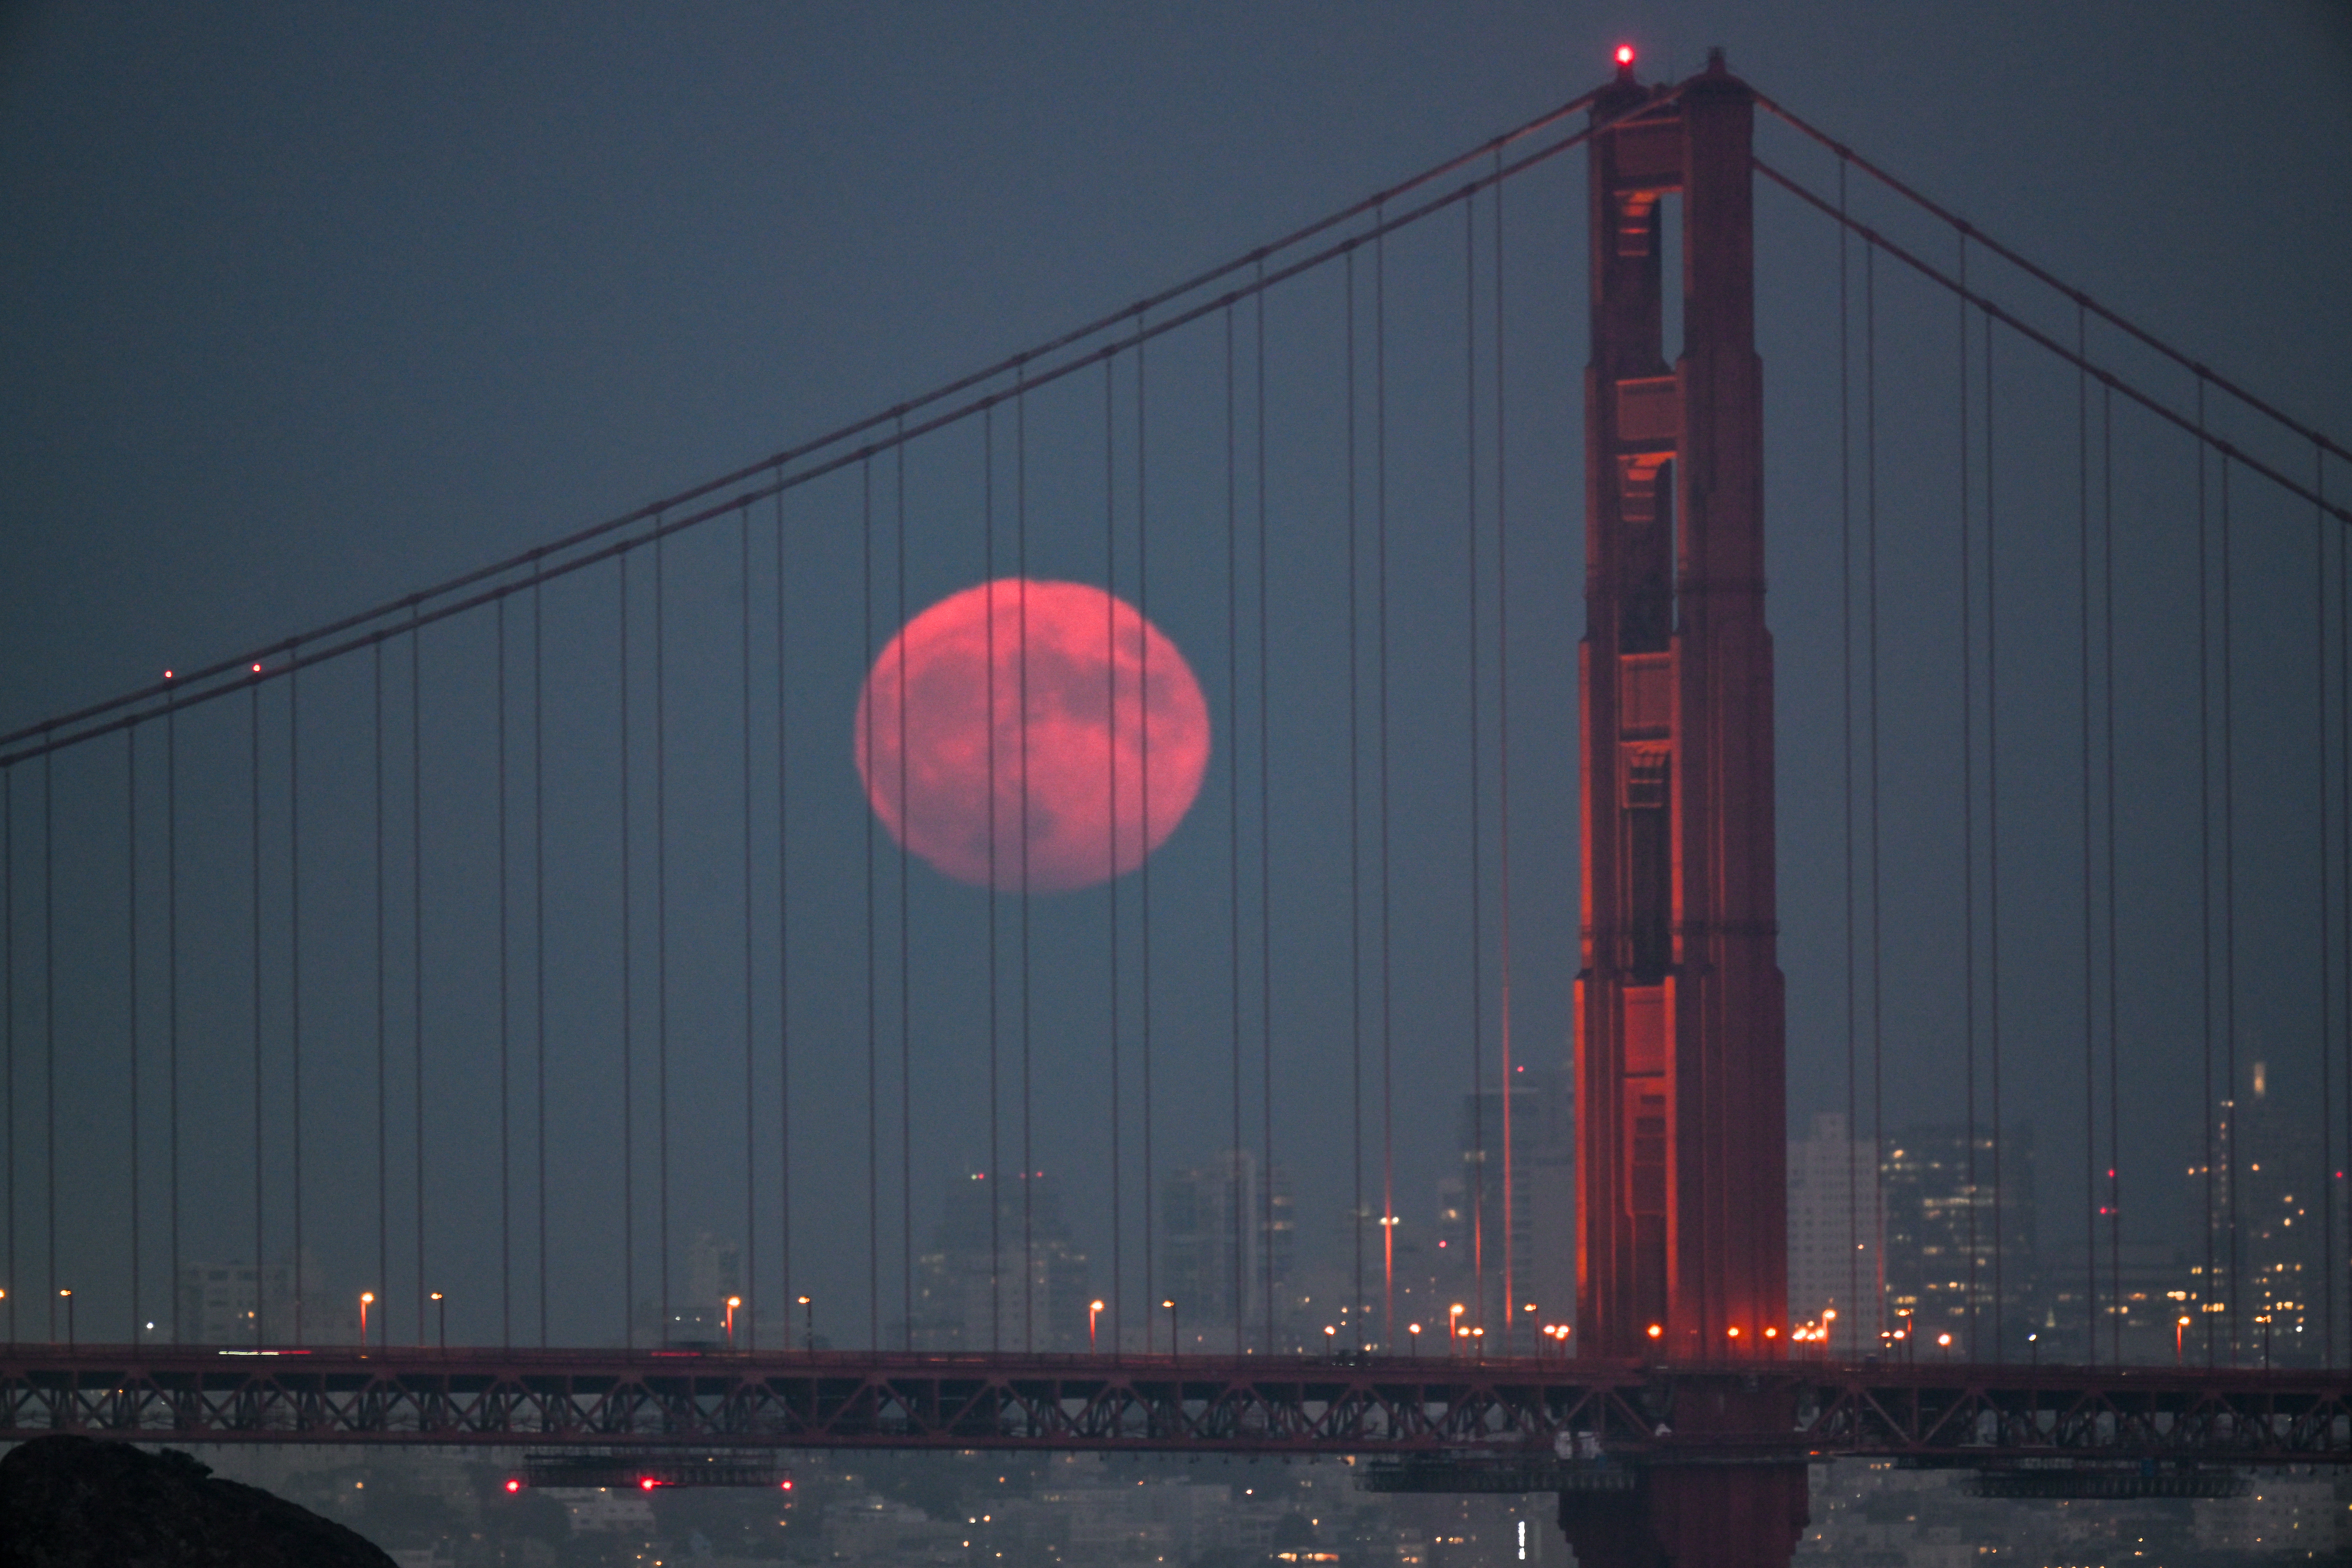 The blue supermoon is seen behind the Golden Gate Bridge in San Francisco